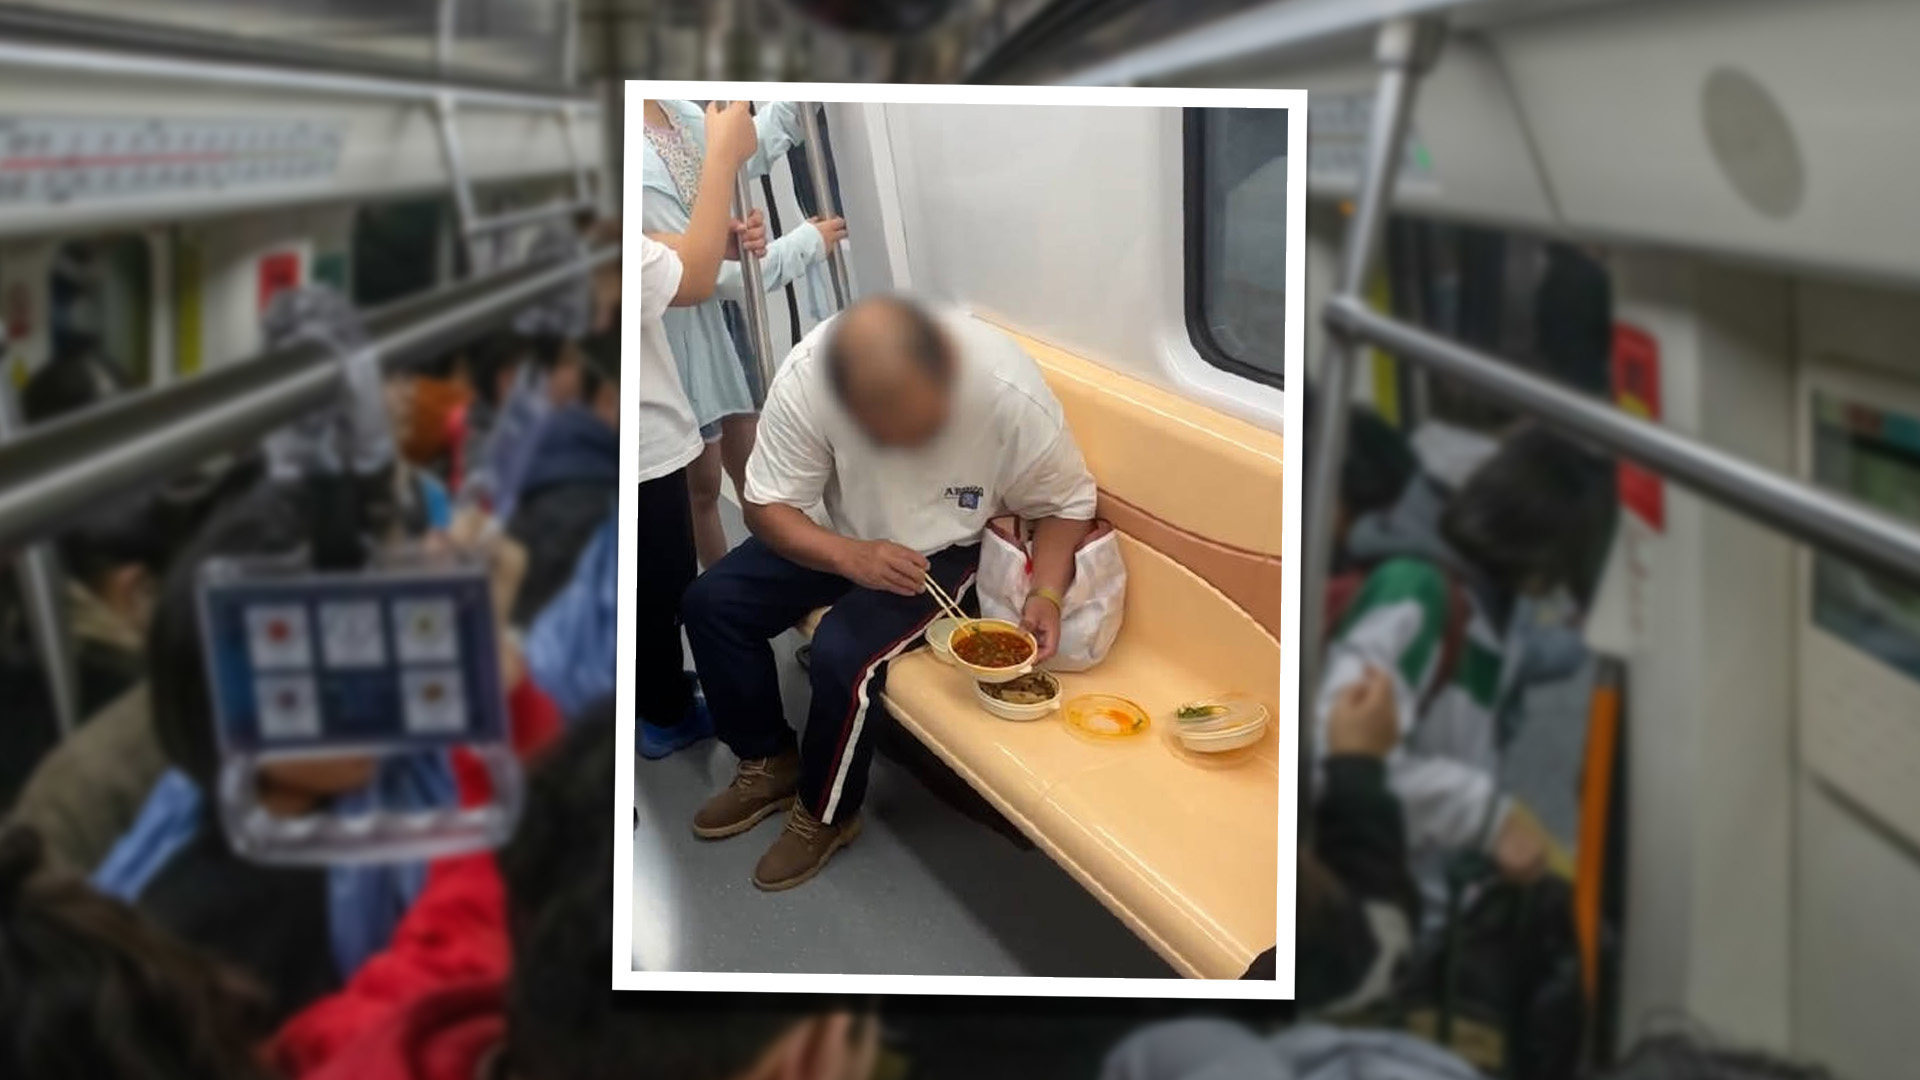 A subway passenger in China has sparked an online debate about etiquette on public transport after he laid out a three-course meal on train seats and tucked in. SCMP composite/Weibo